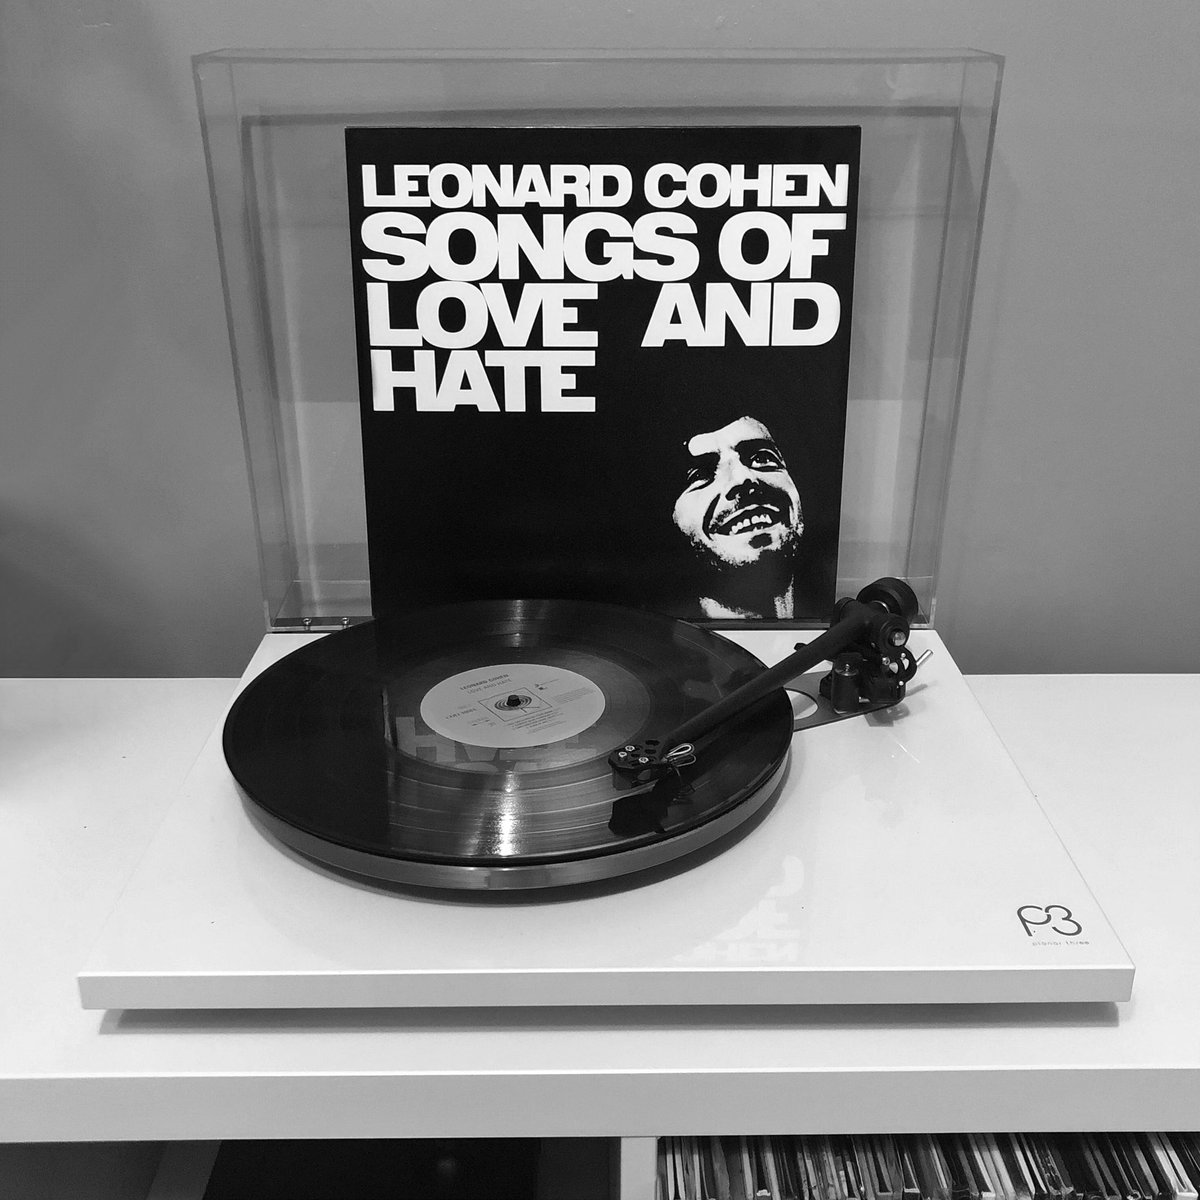 119Leonard CohenSongs of Love and Hate An album where I wish I liked a fine single malt. If you do - grab the bottle, sit back and prepare to be emotionally dragged in deep  #AtoZMusicChallenge #AtoZMusicCollection